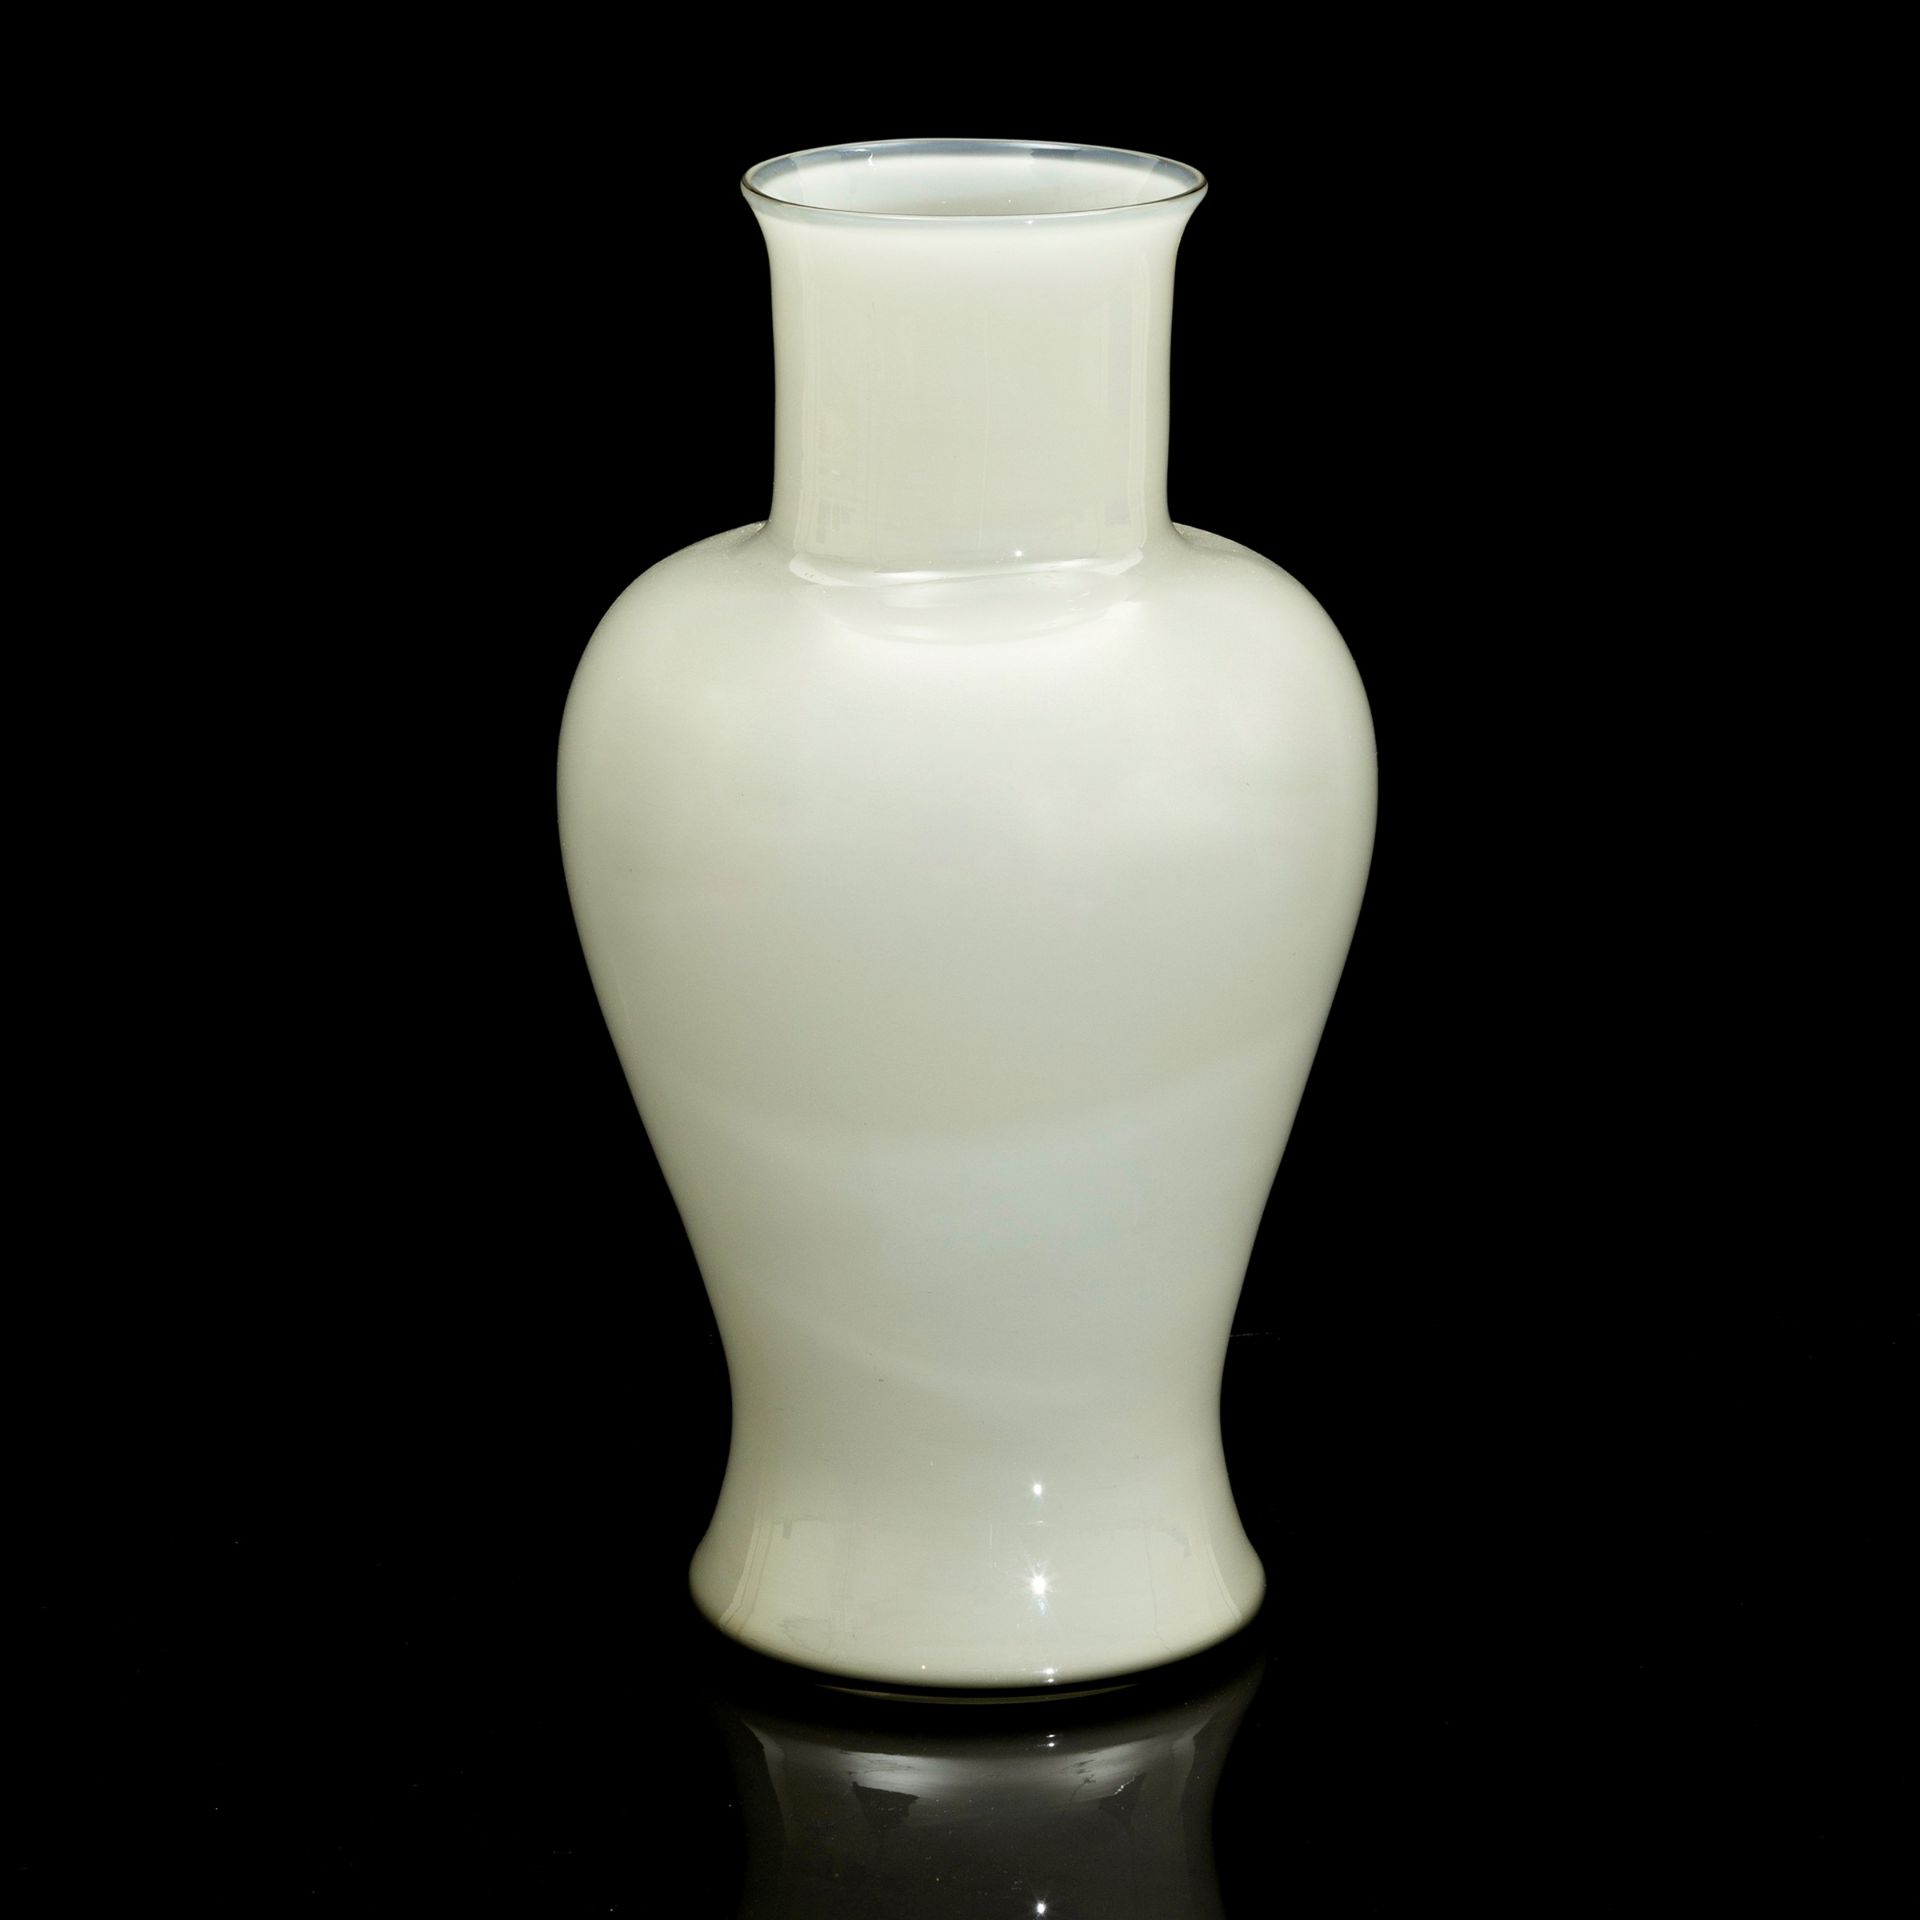 Venini, Murano, 1950 ca - A baluster vase in opaline cased grey glass. Acid-etched [...]